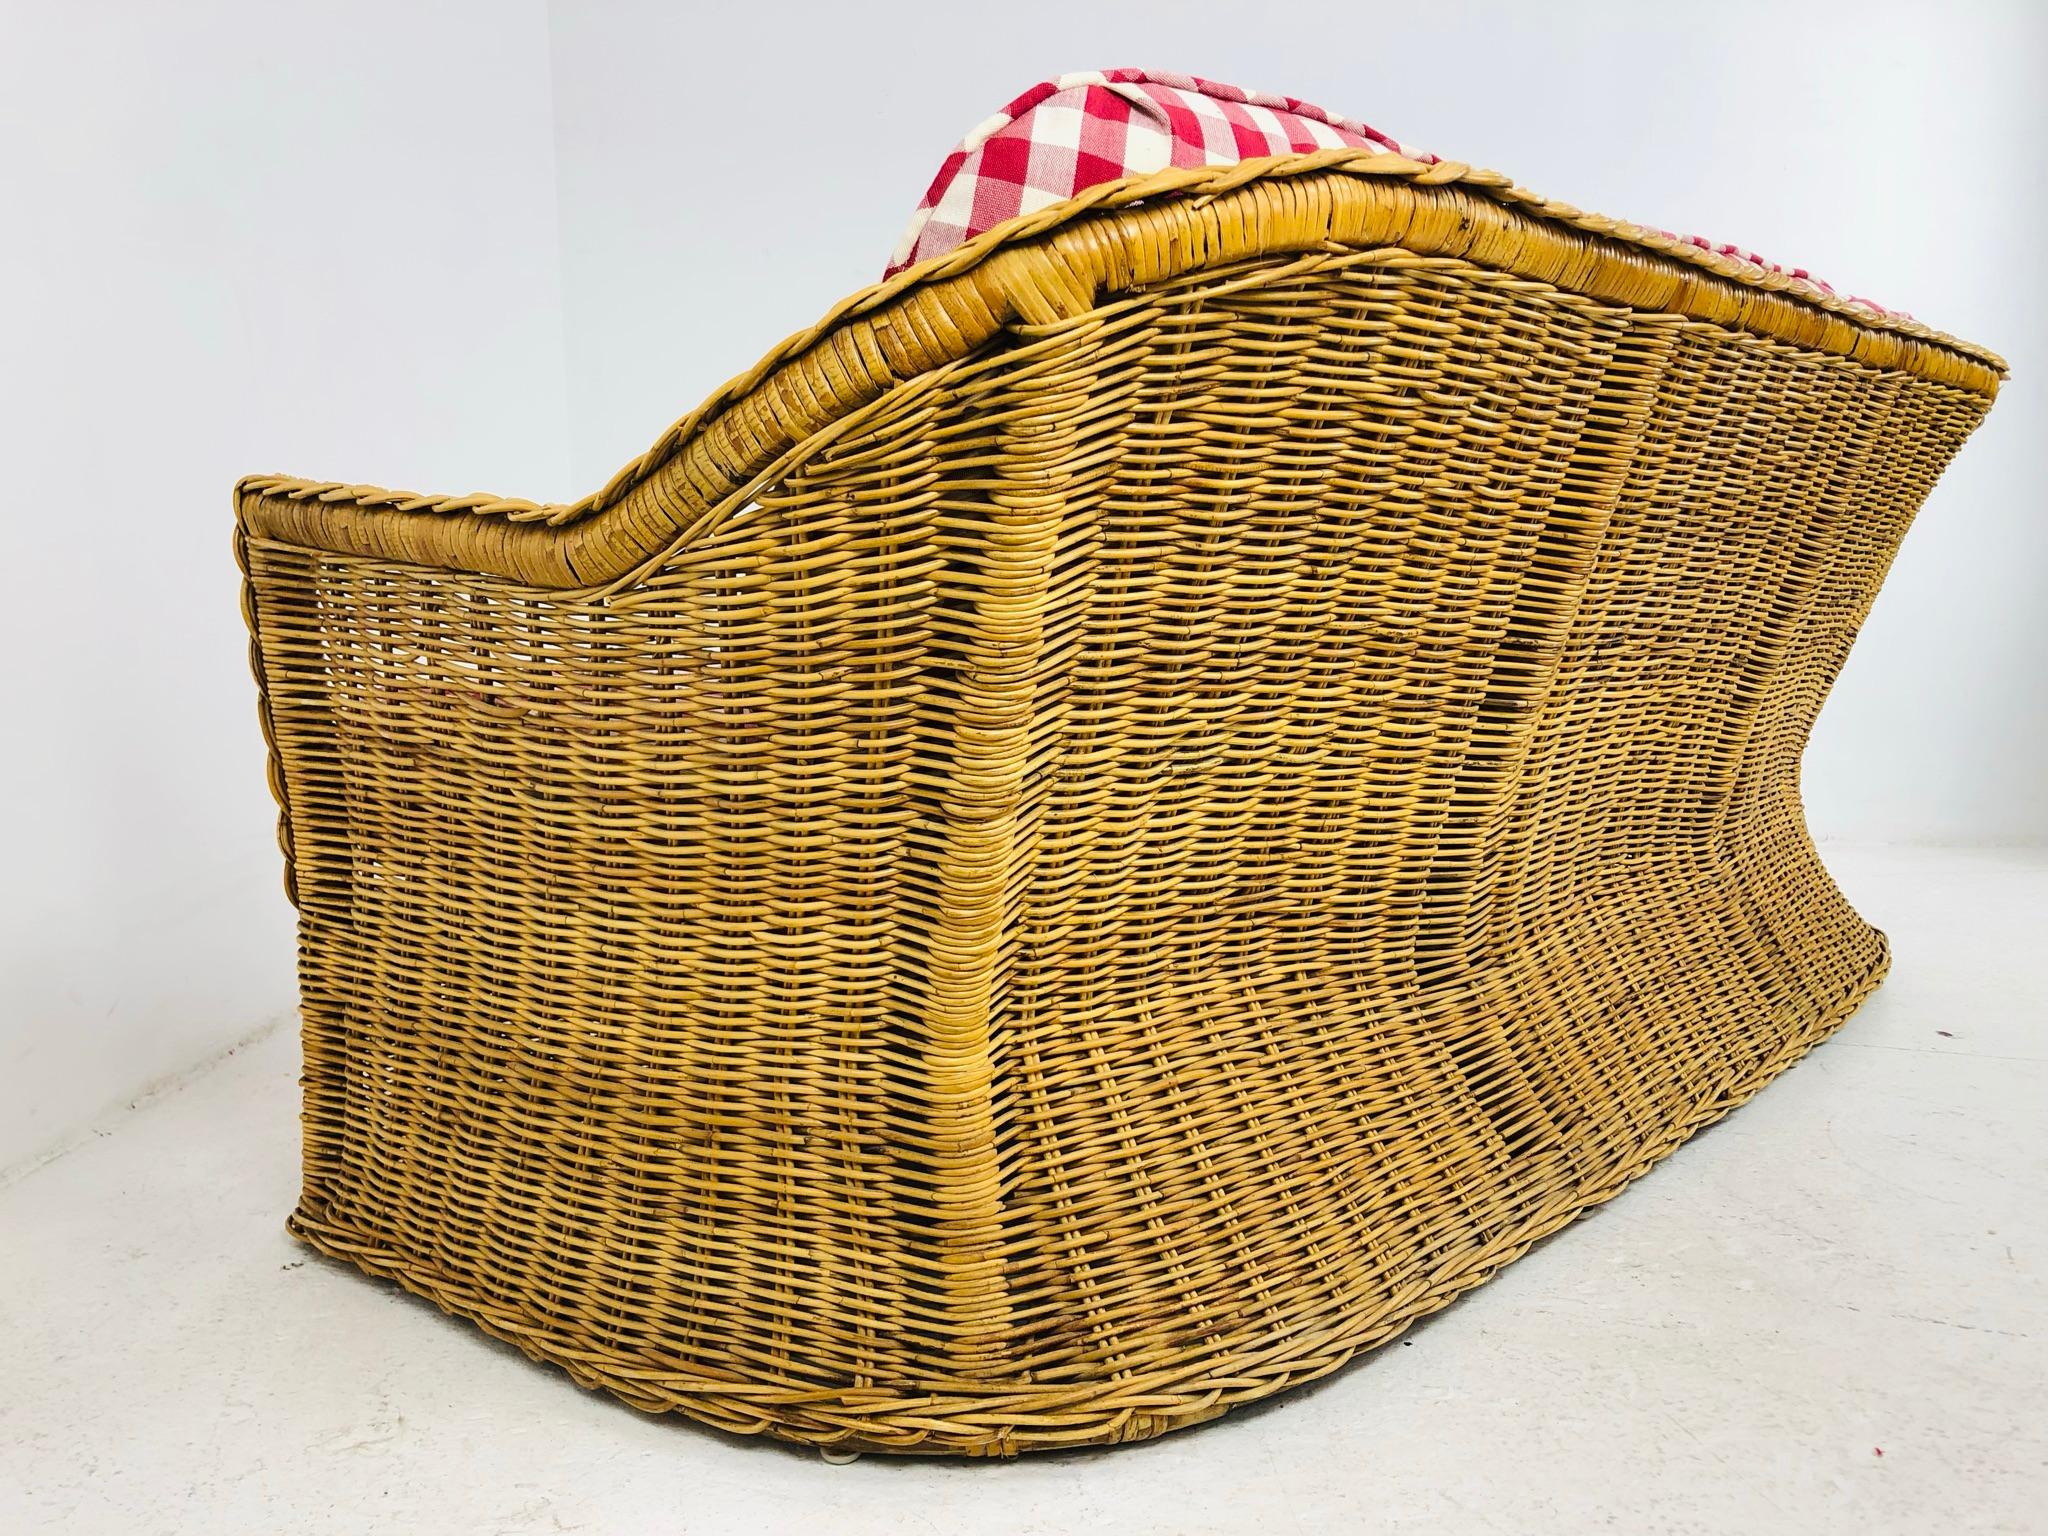 Upholstery Braided Rattan Sofa by Wicker Works